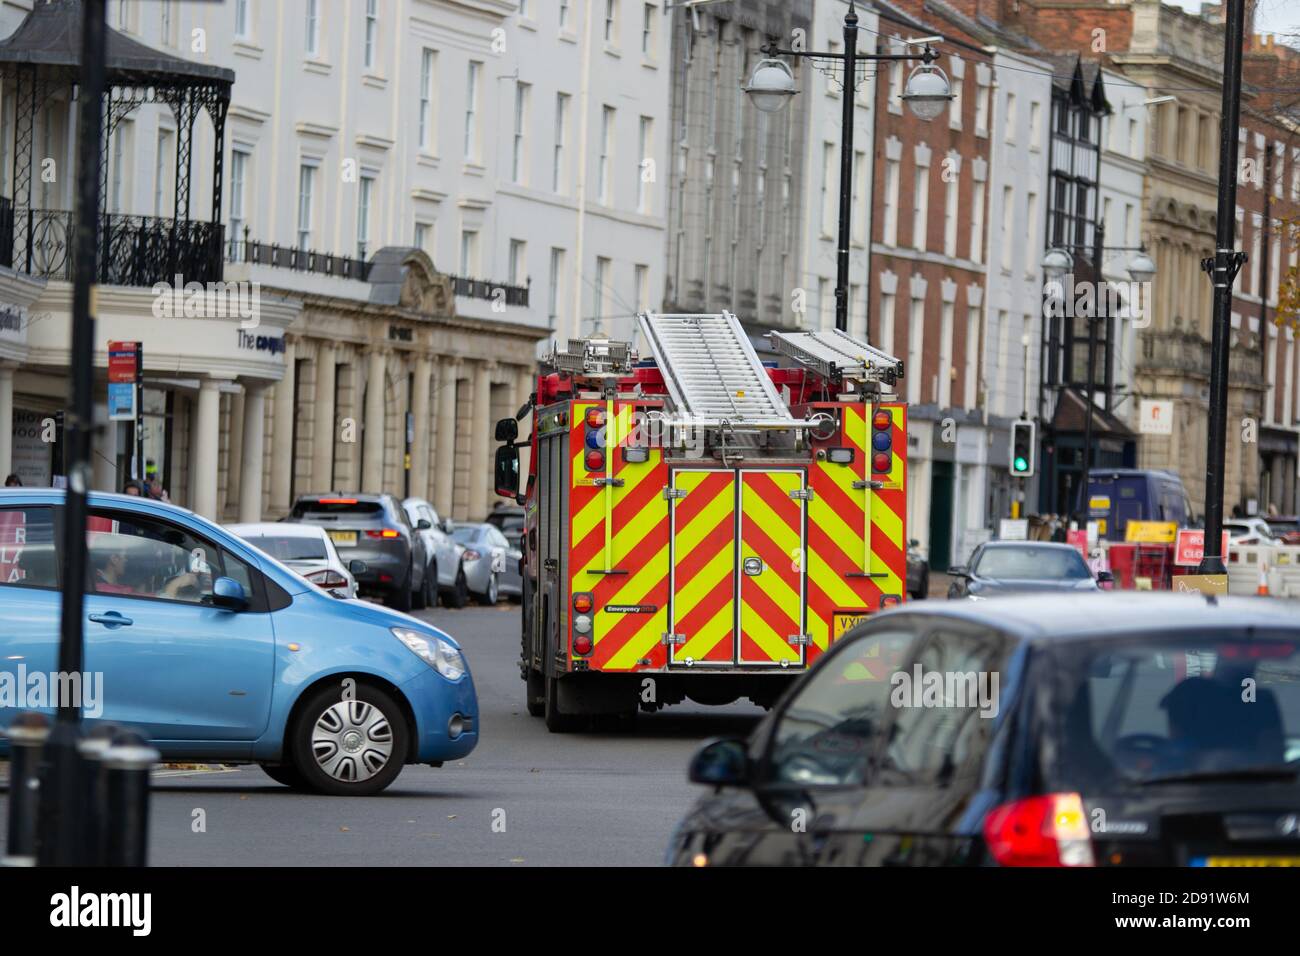 Warwickshire Fire and Rescue Service engine in Leamington Spa Stock Photo